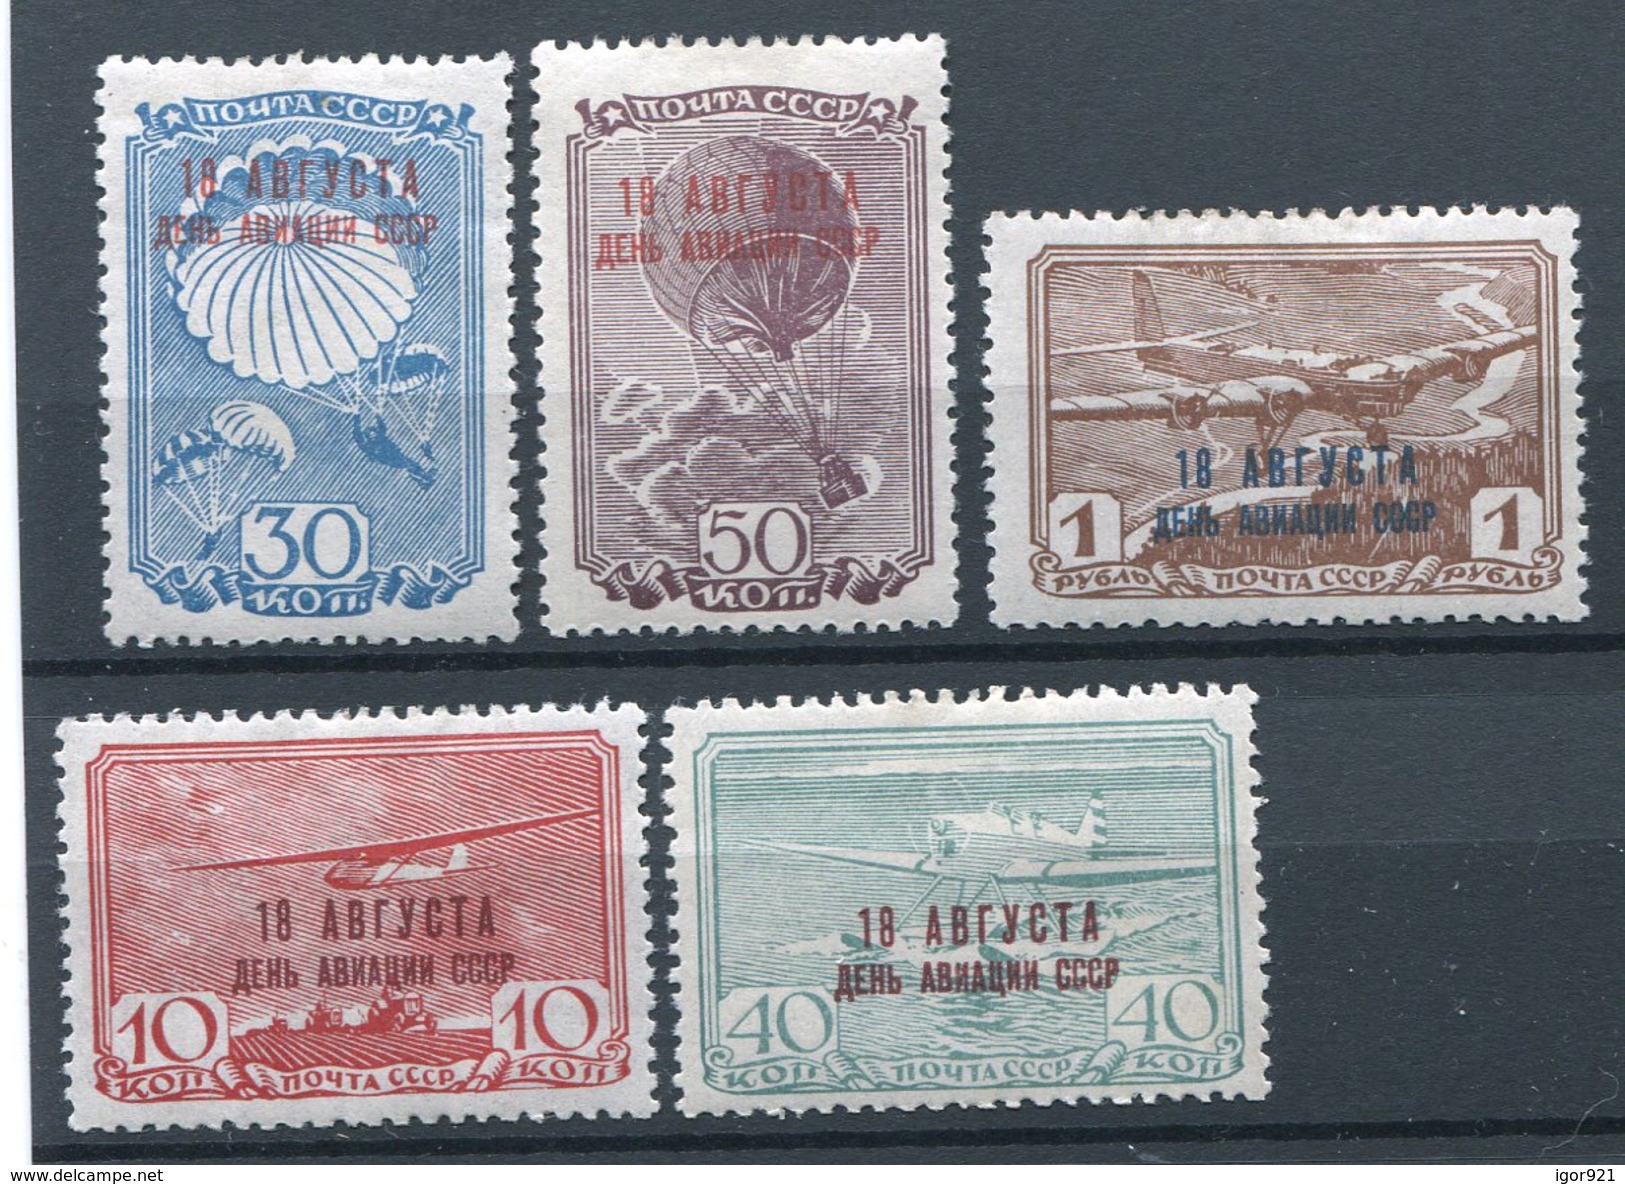 RUSSIA 1939,SC C76-76D,MI 709-13,MLH *,AVIATION DAY,RED OVERPRINTED - Unused Stamps